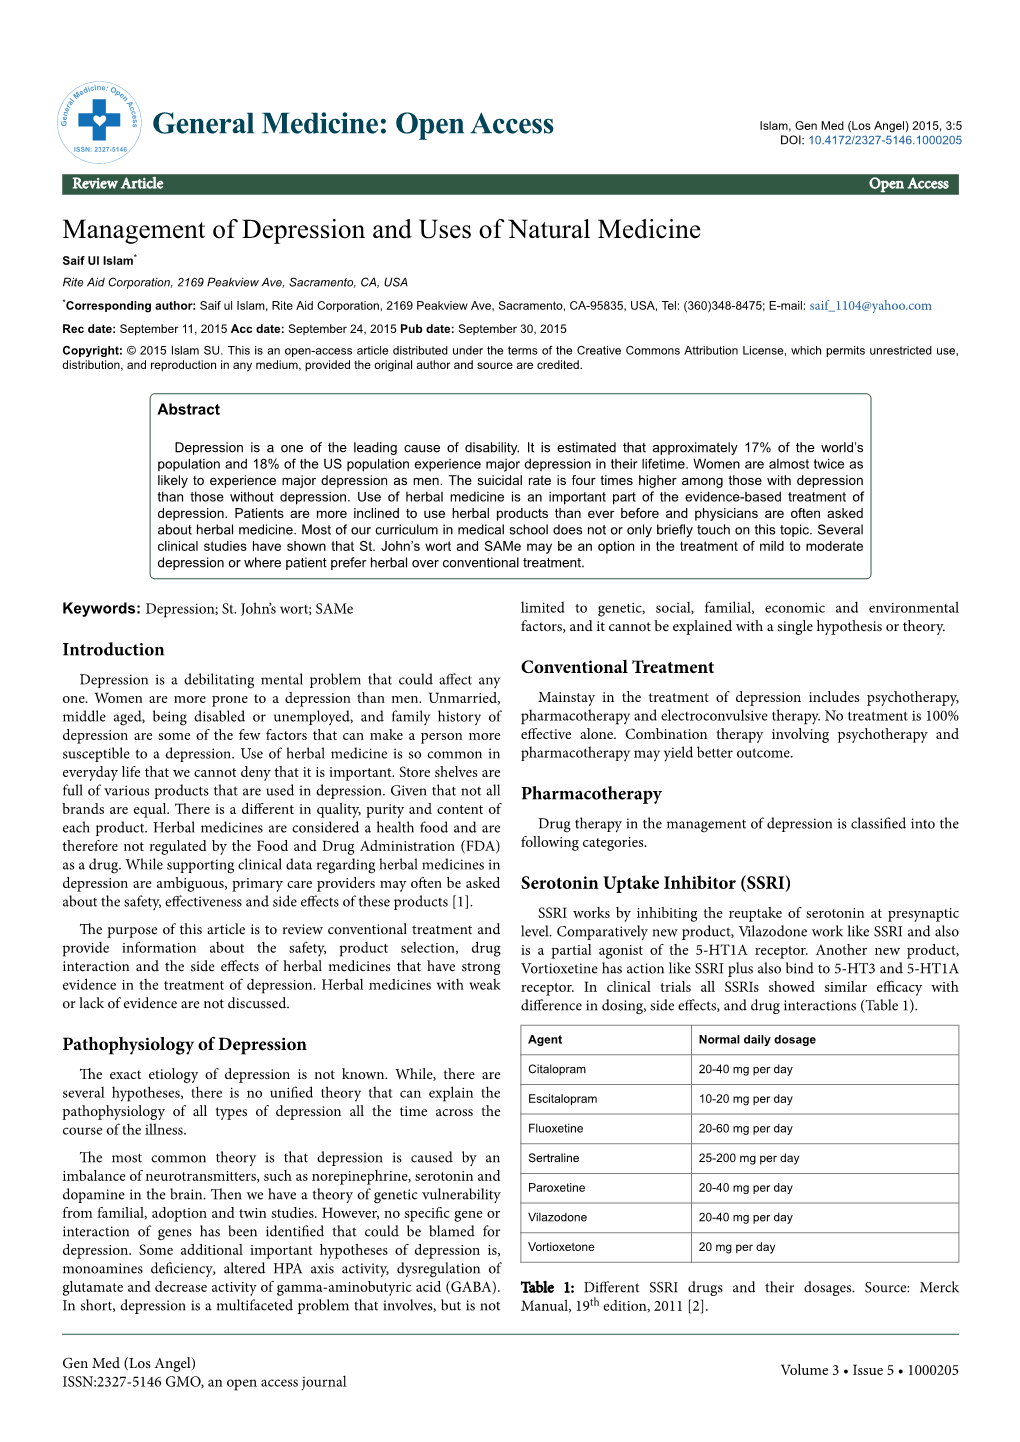 Management of Depression and Uses of Natural Medicine